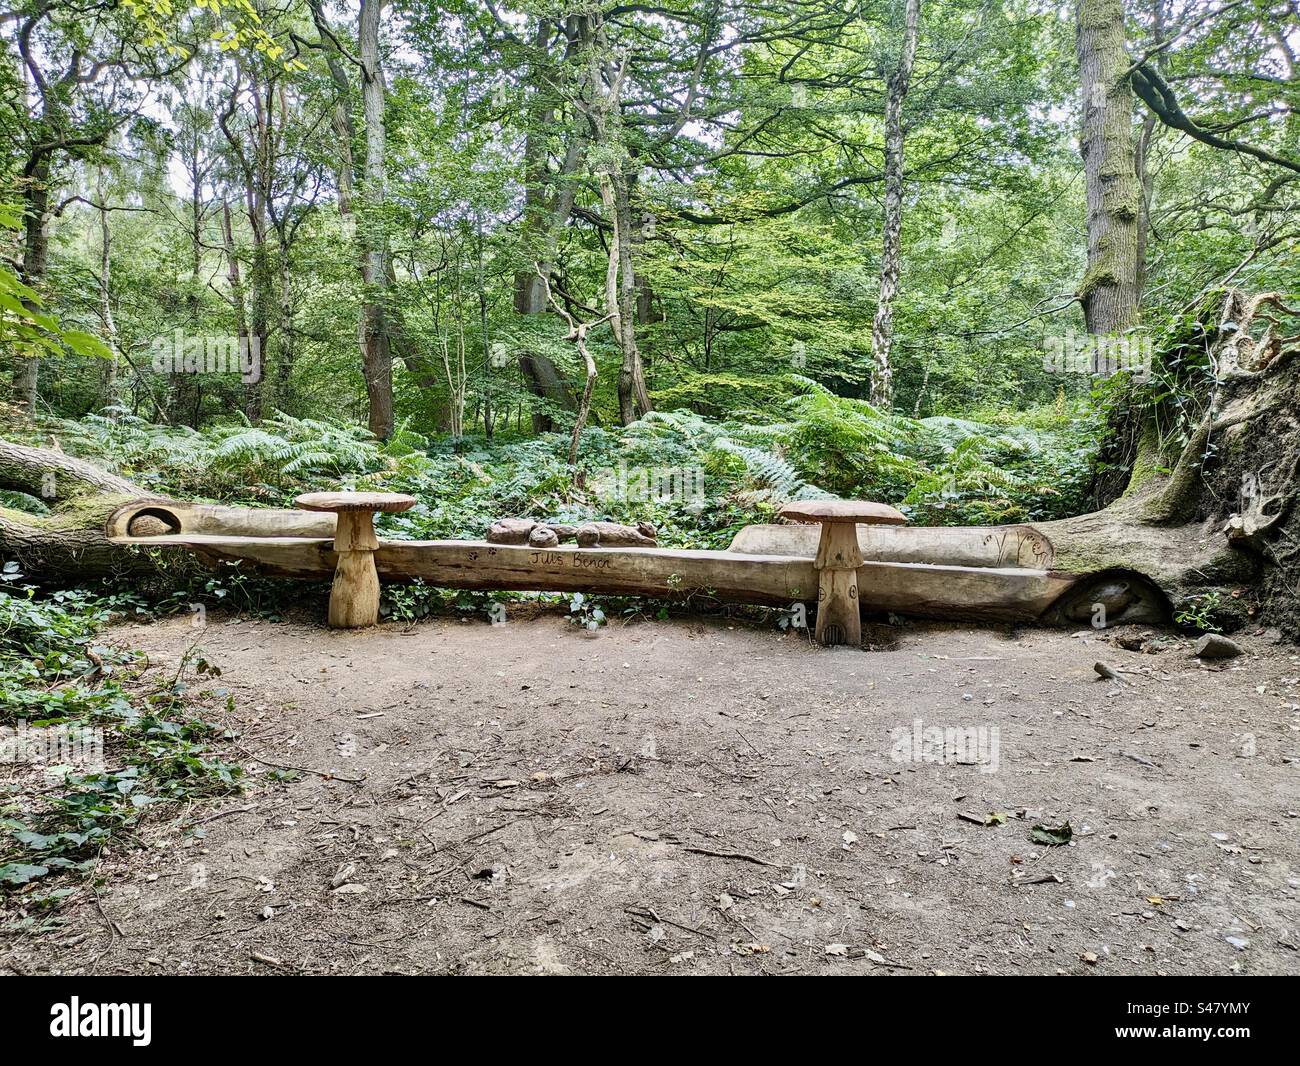 Fallen tree felled bench art sculpture Walking on a path wood tree countryside nature trees plant plants English park outside south of England 11-10-23 Stock Photo